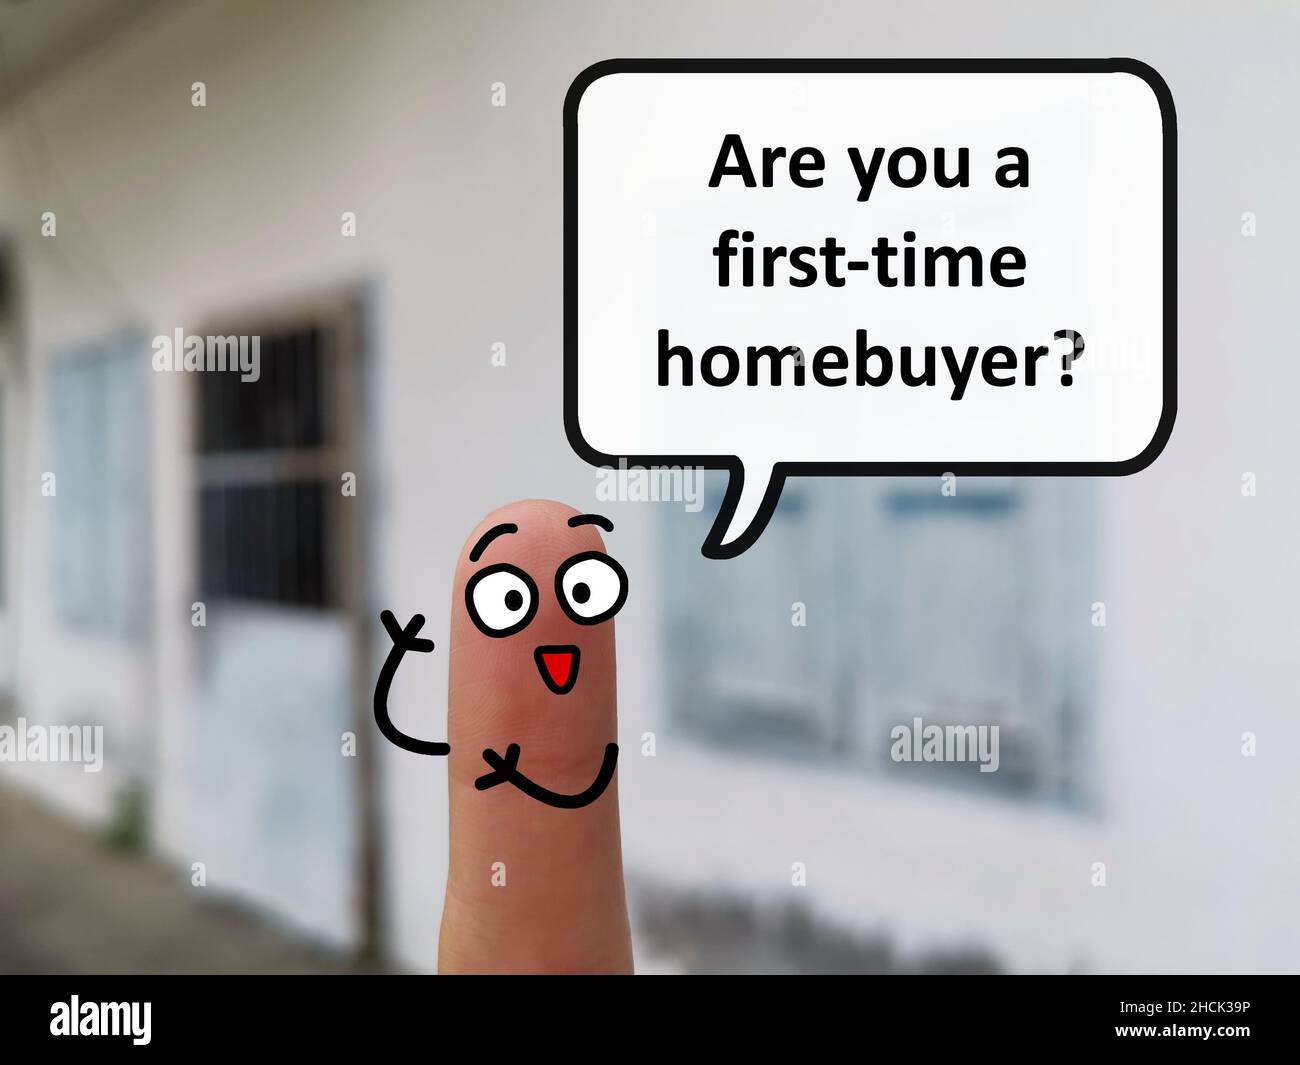 Two fingers are decorated as one person. He is asking if you are a first time homebuyer. Stock Photo